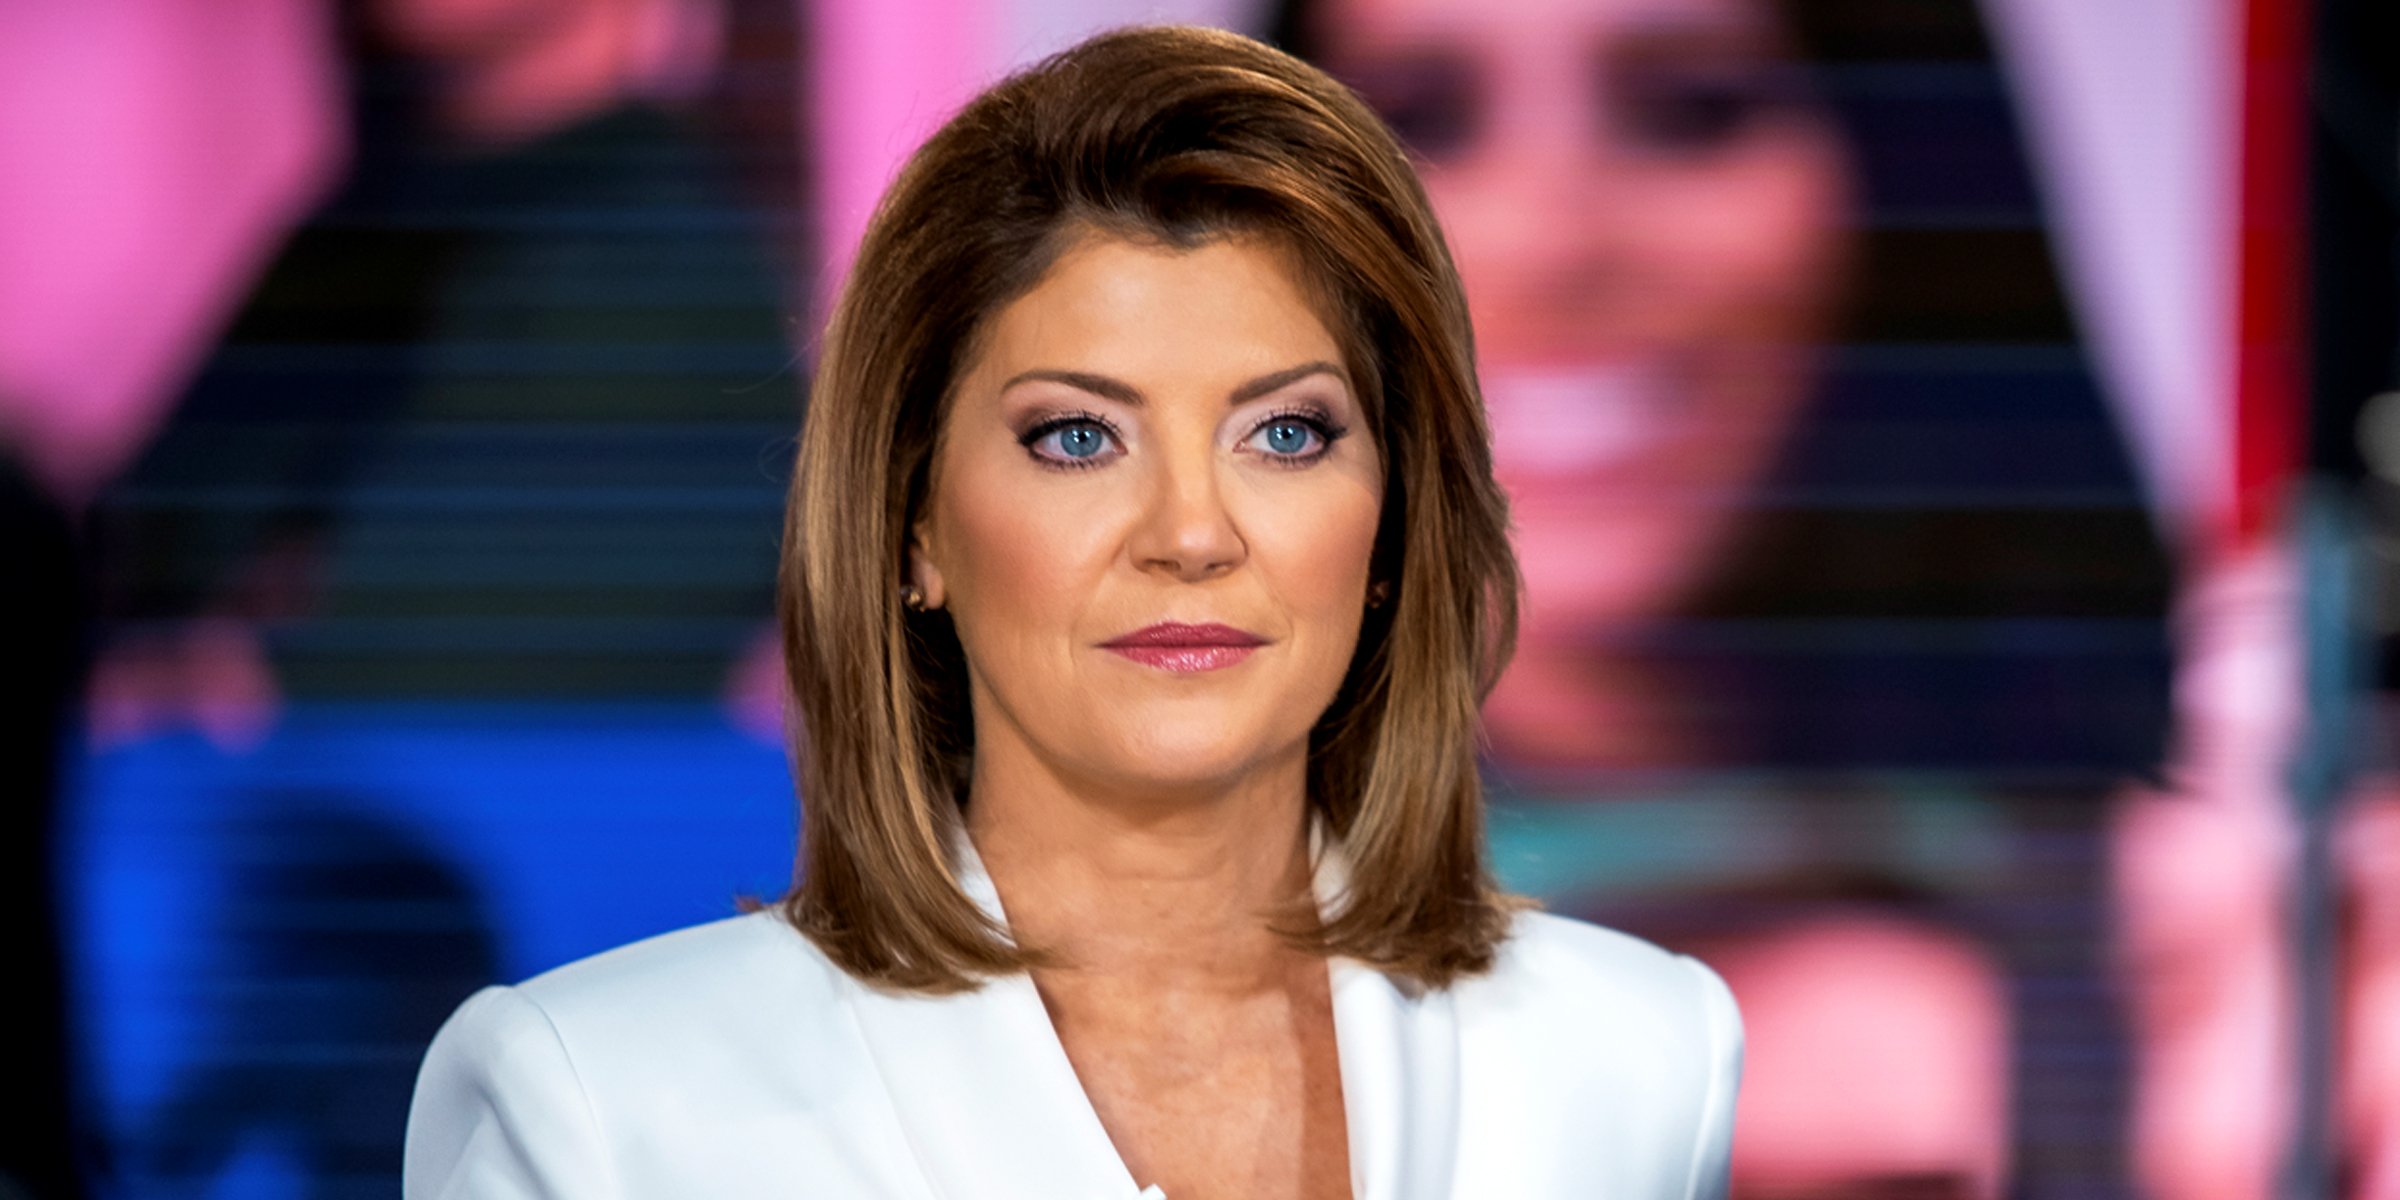 Getty Images / instagram.com/norahodonnell